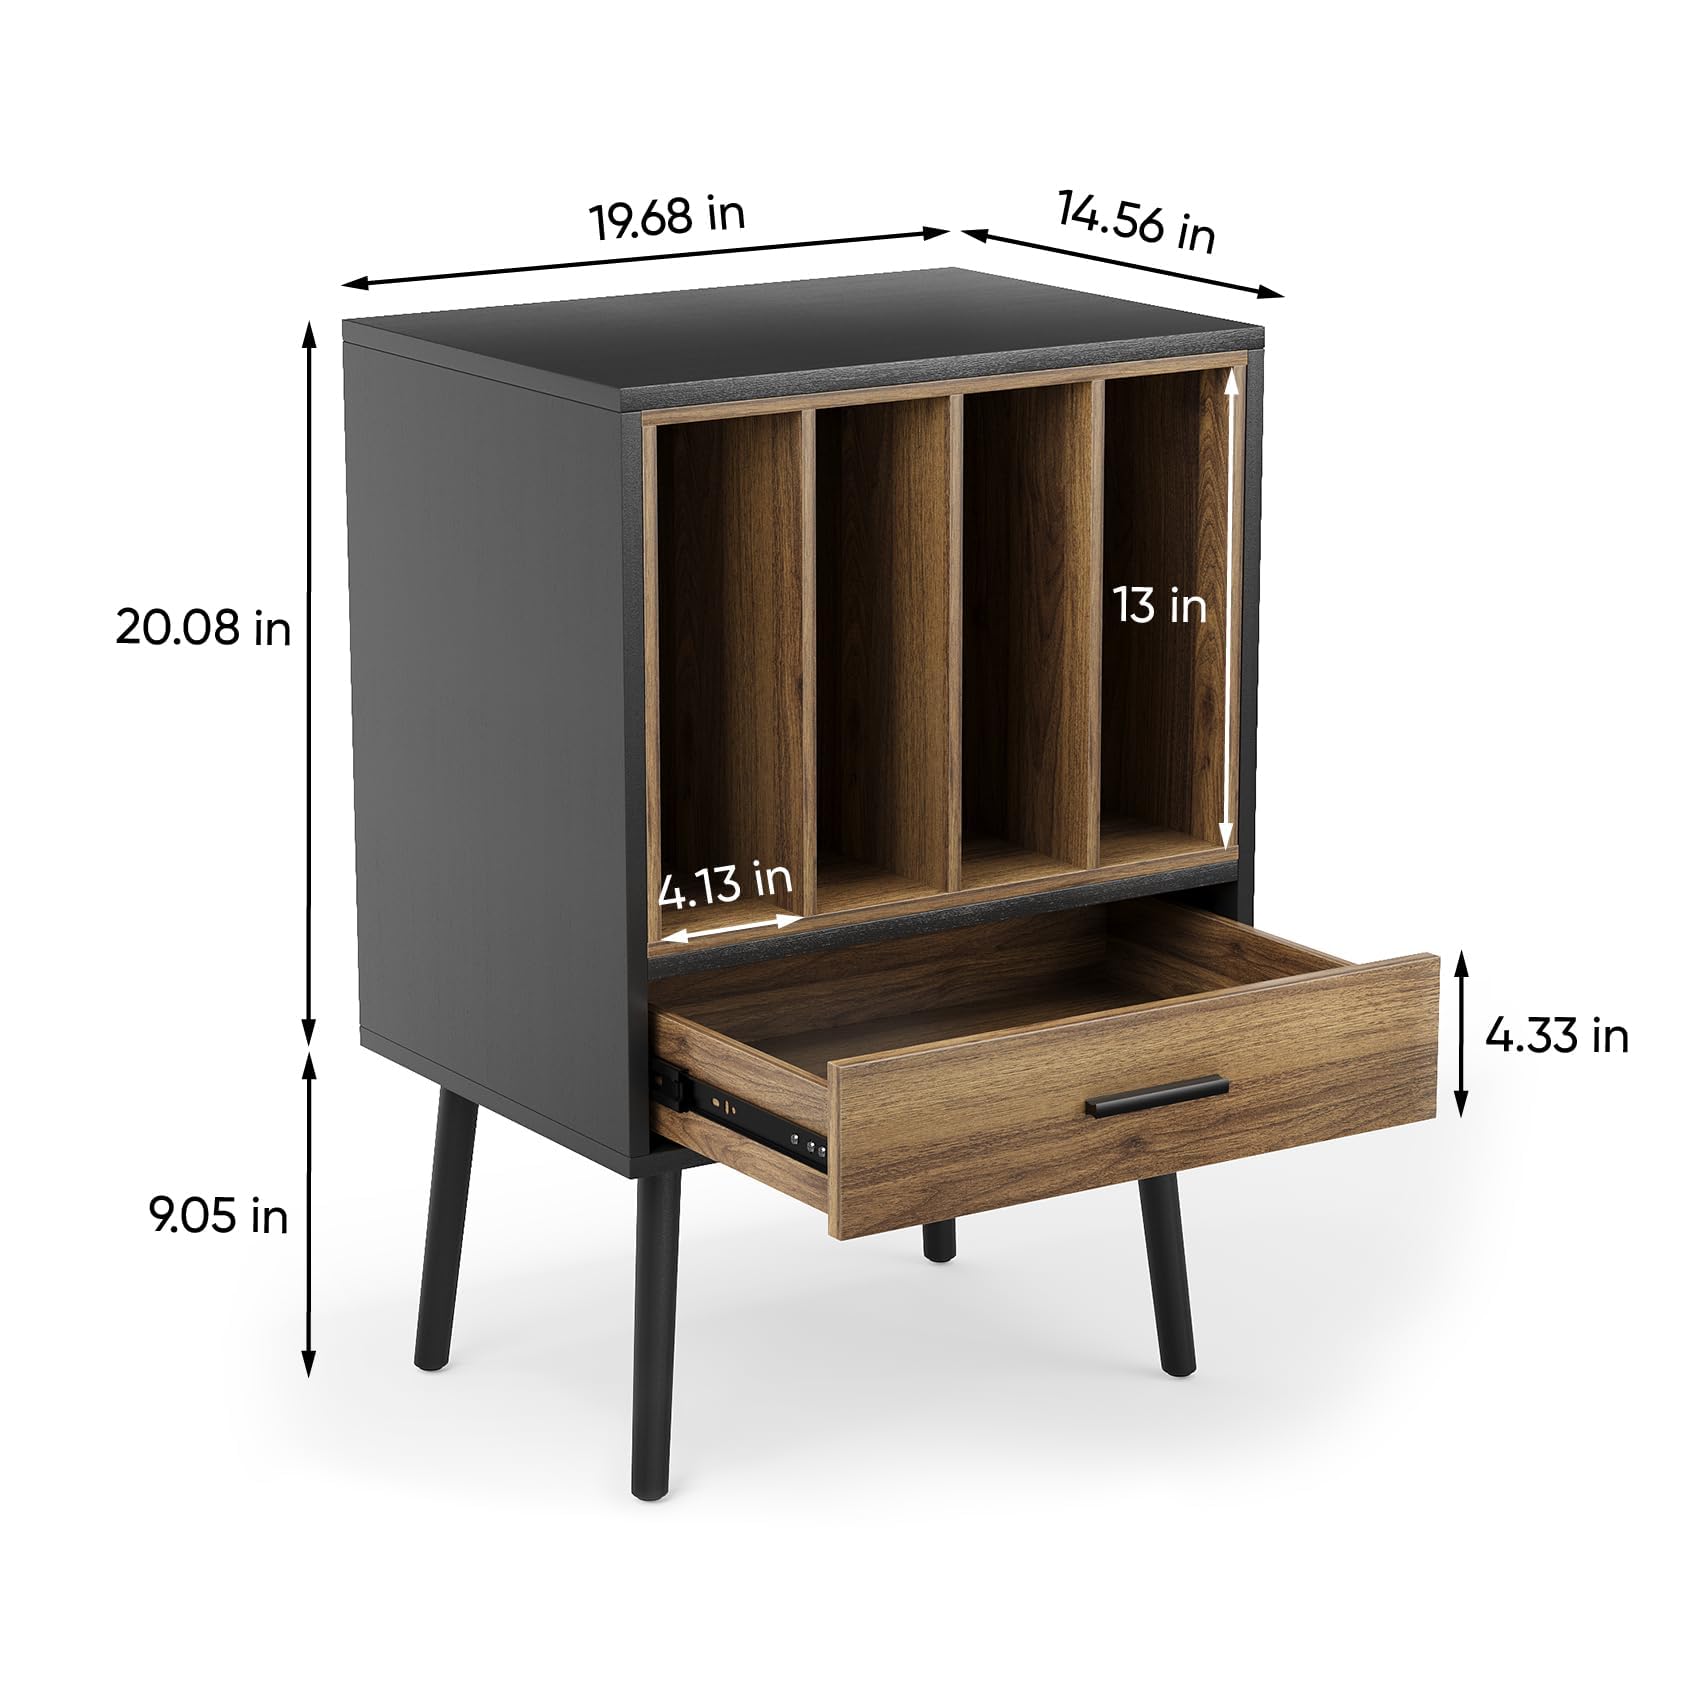 Semiocthome Record Player Stand with Nesting Vinyl Storage Crate, Record Player Table with a Drawer and Solid Wood Legs, Side End Table for Turntables for Living Room Bedroom